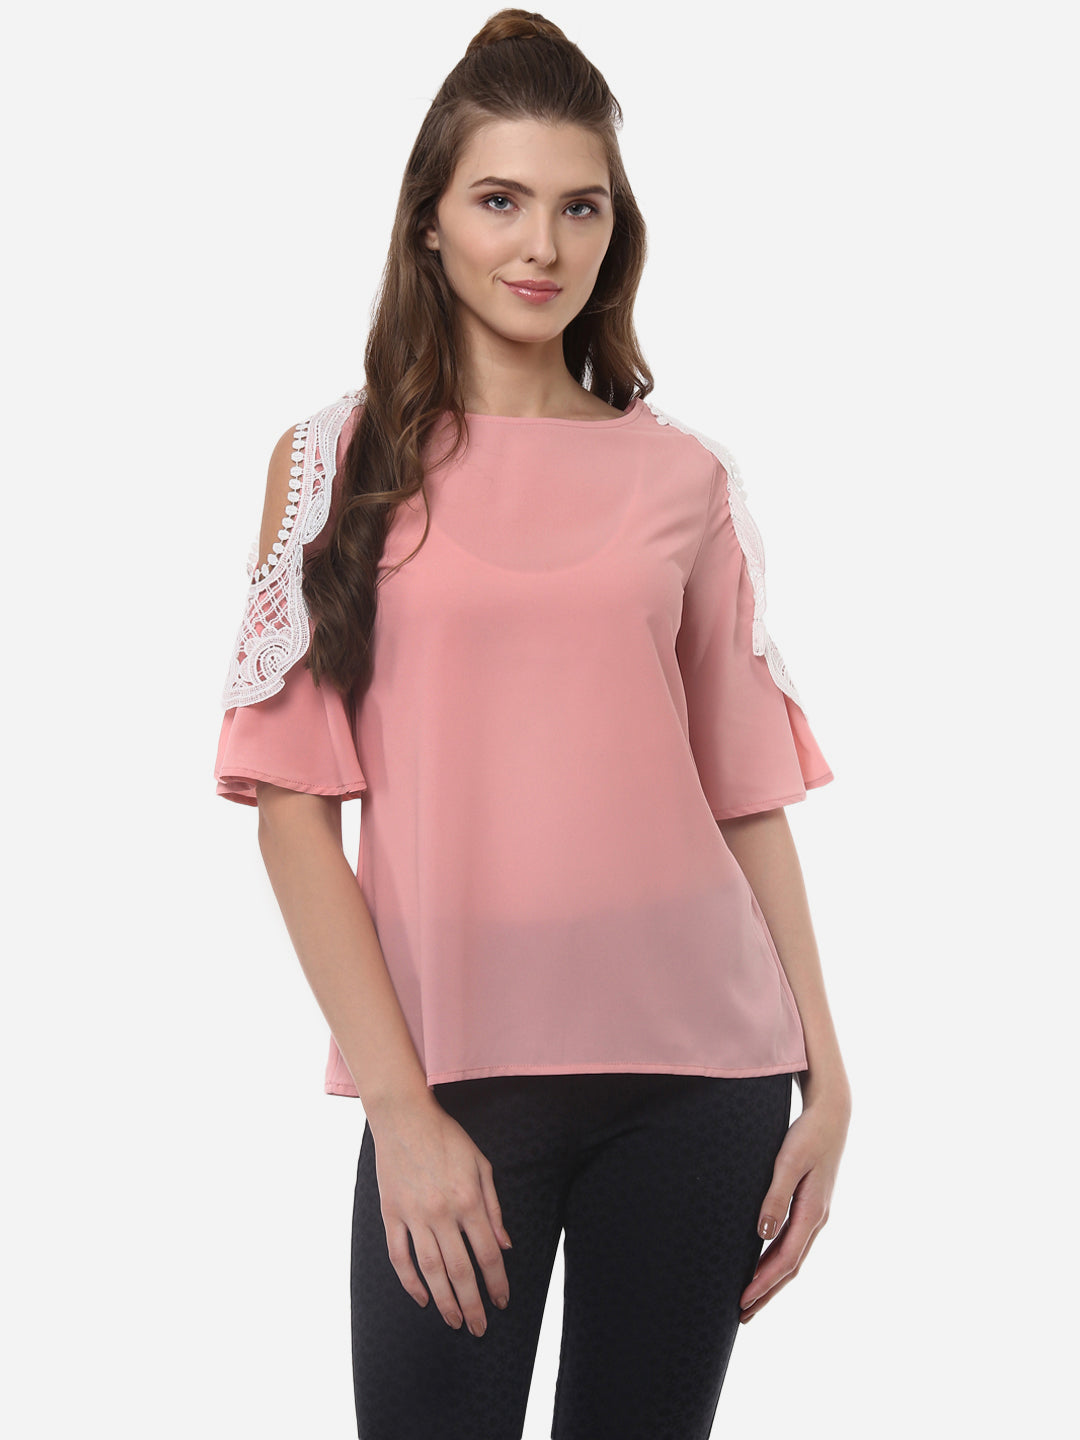 Women's Pink Polyester Top with Lace on the shoulder